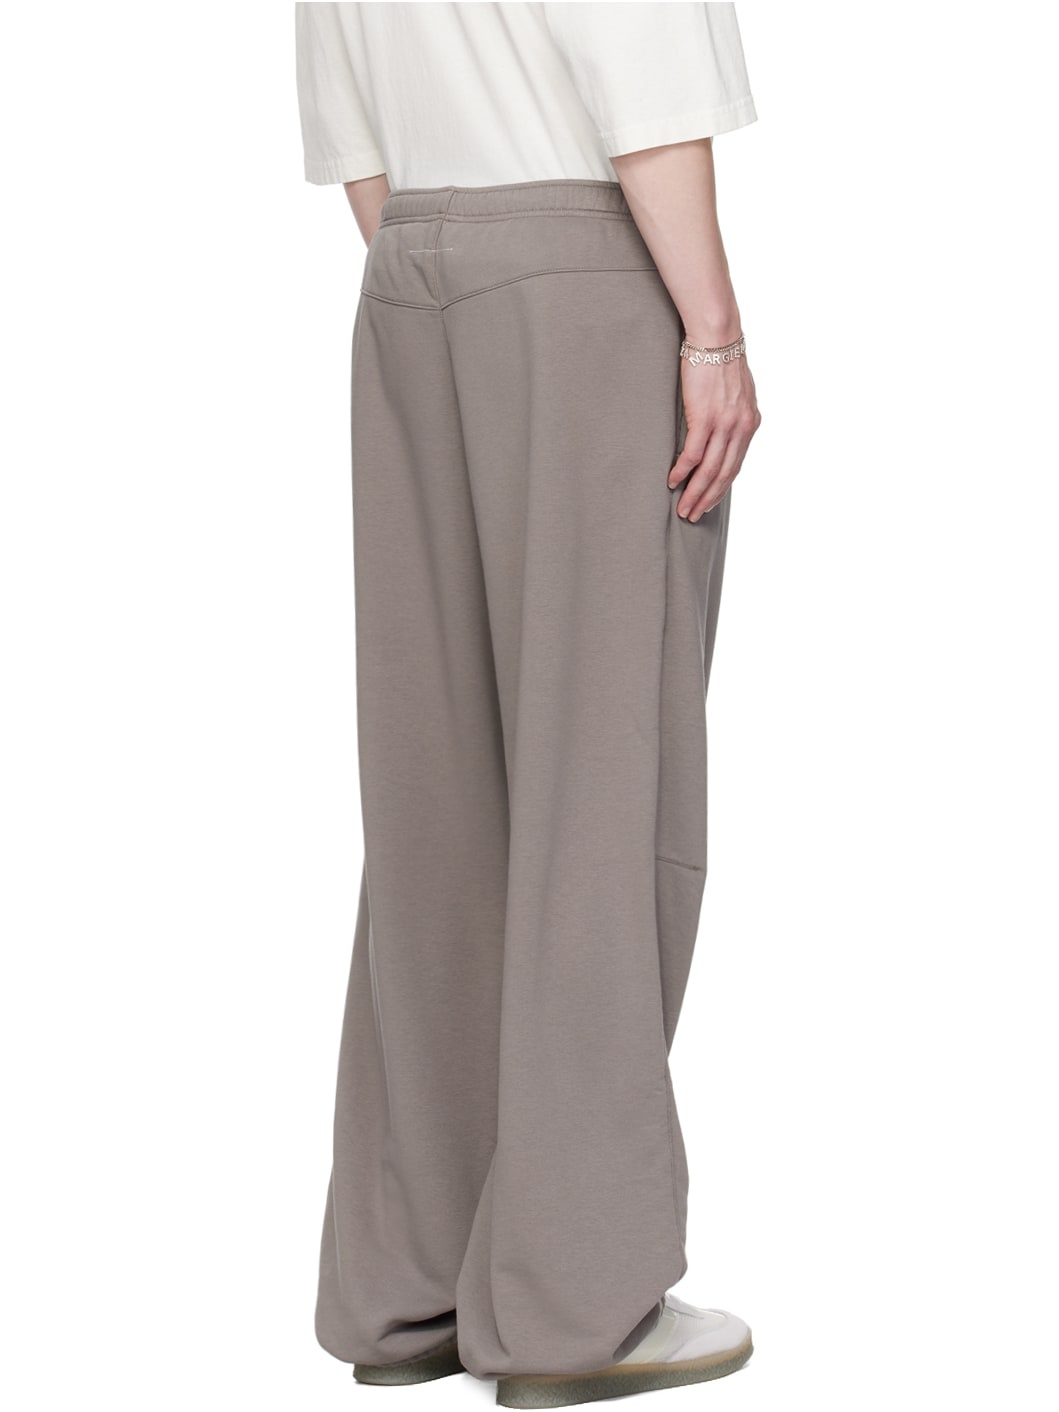 Taupe Embroidered Sweatpants - 3